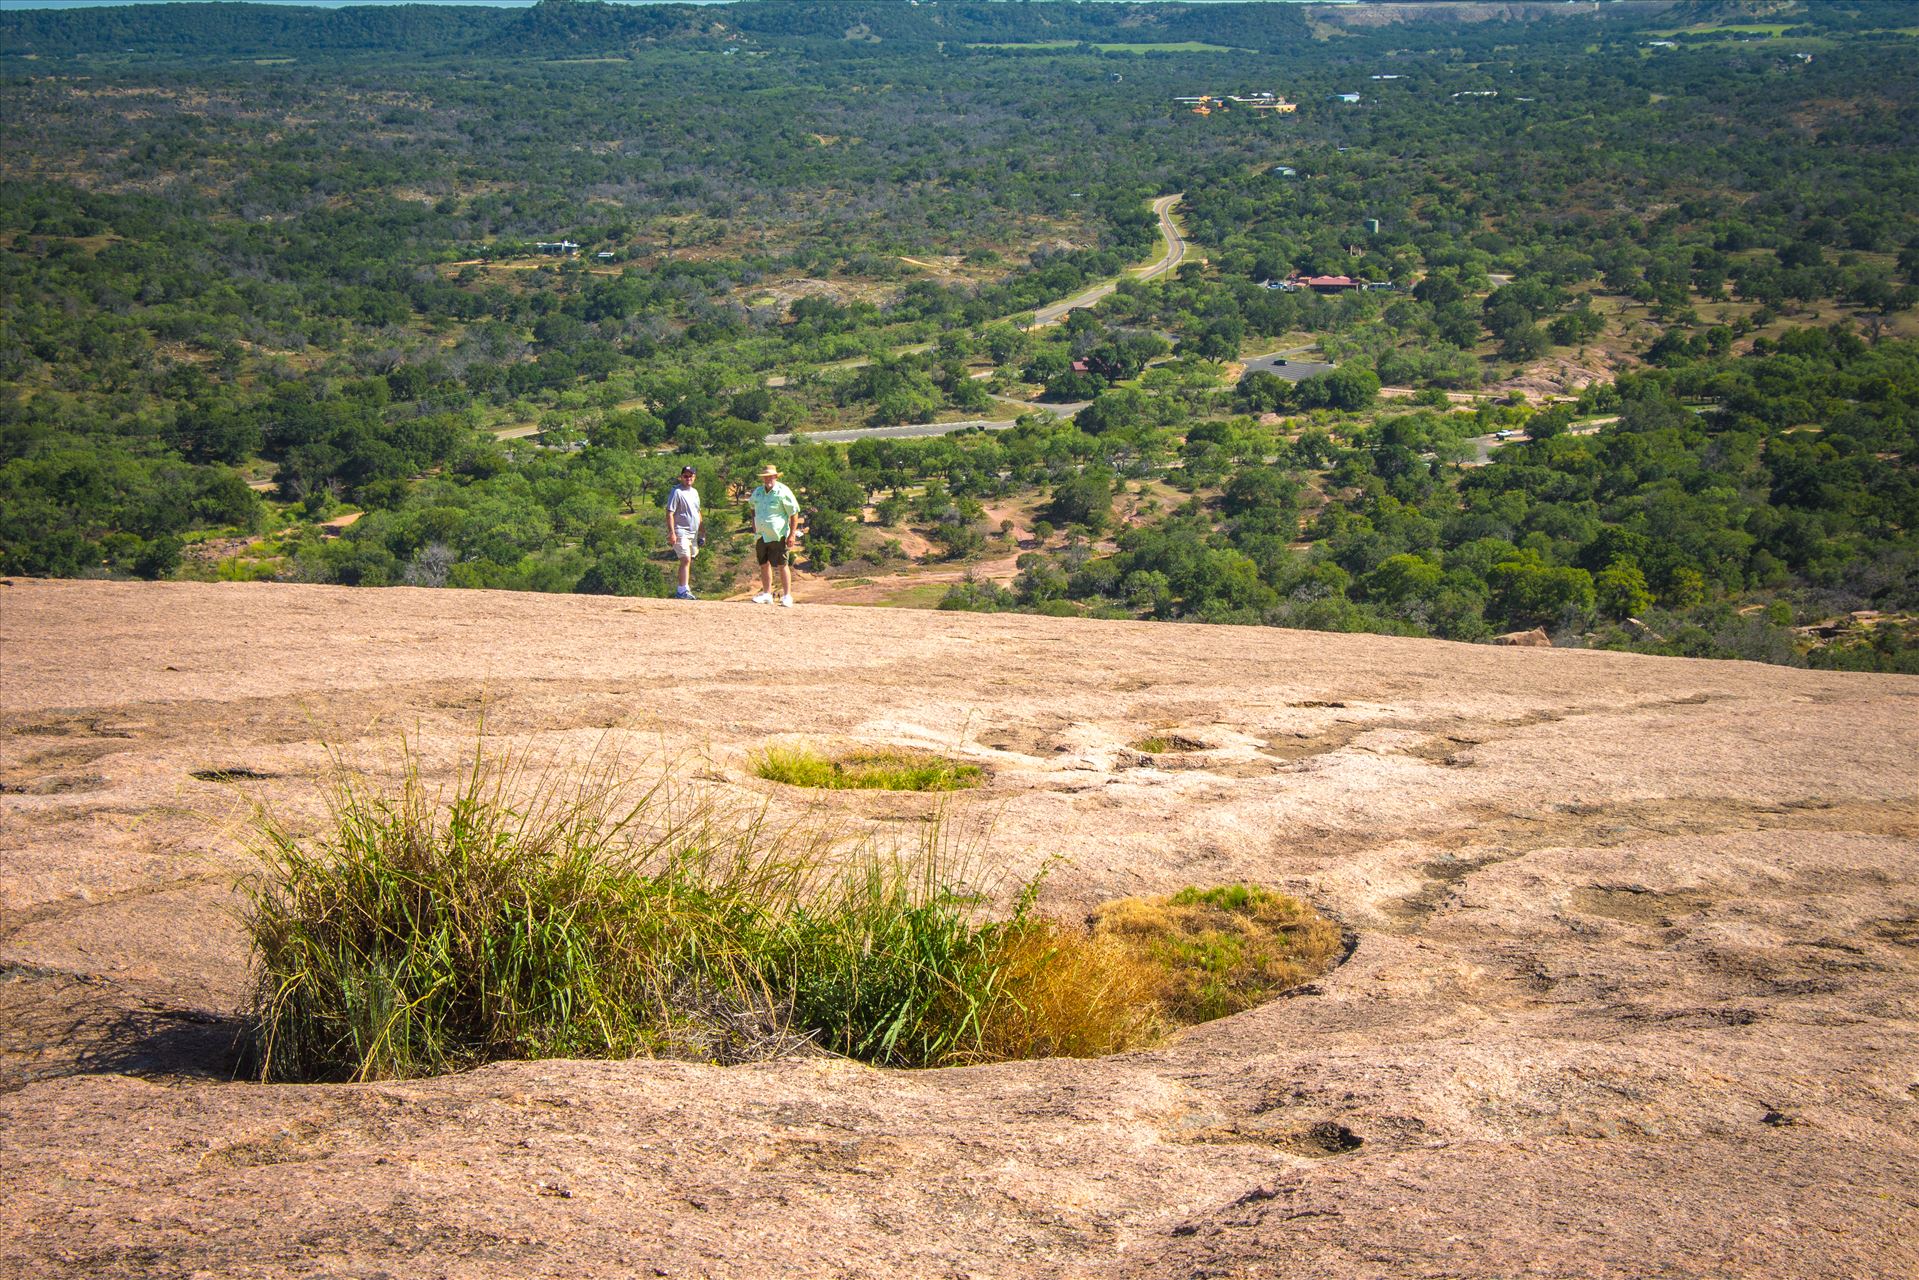 20130723-Enchanted Rock-DSLR-041.jpg -  by Charles Smith Photography